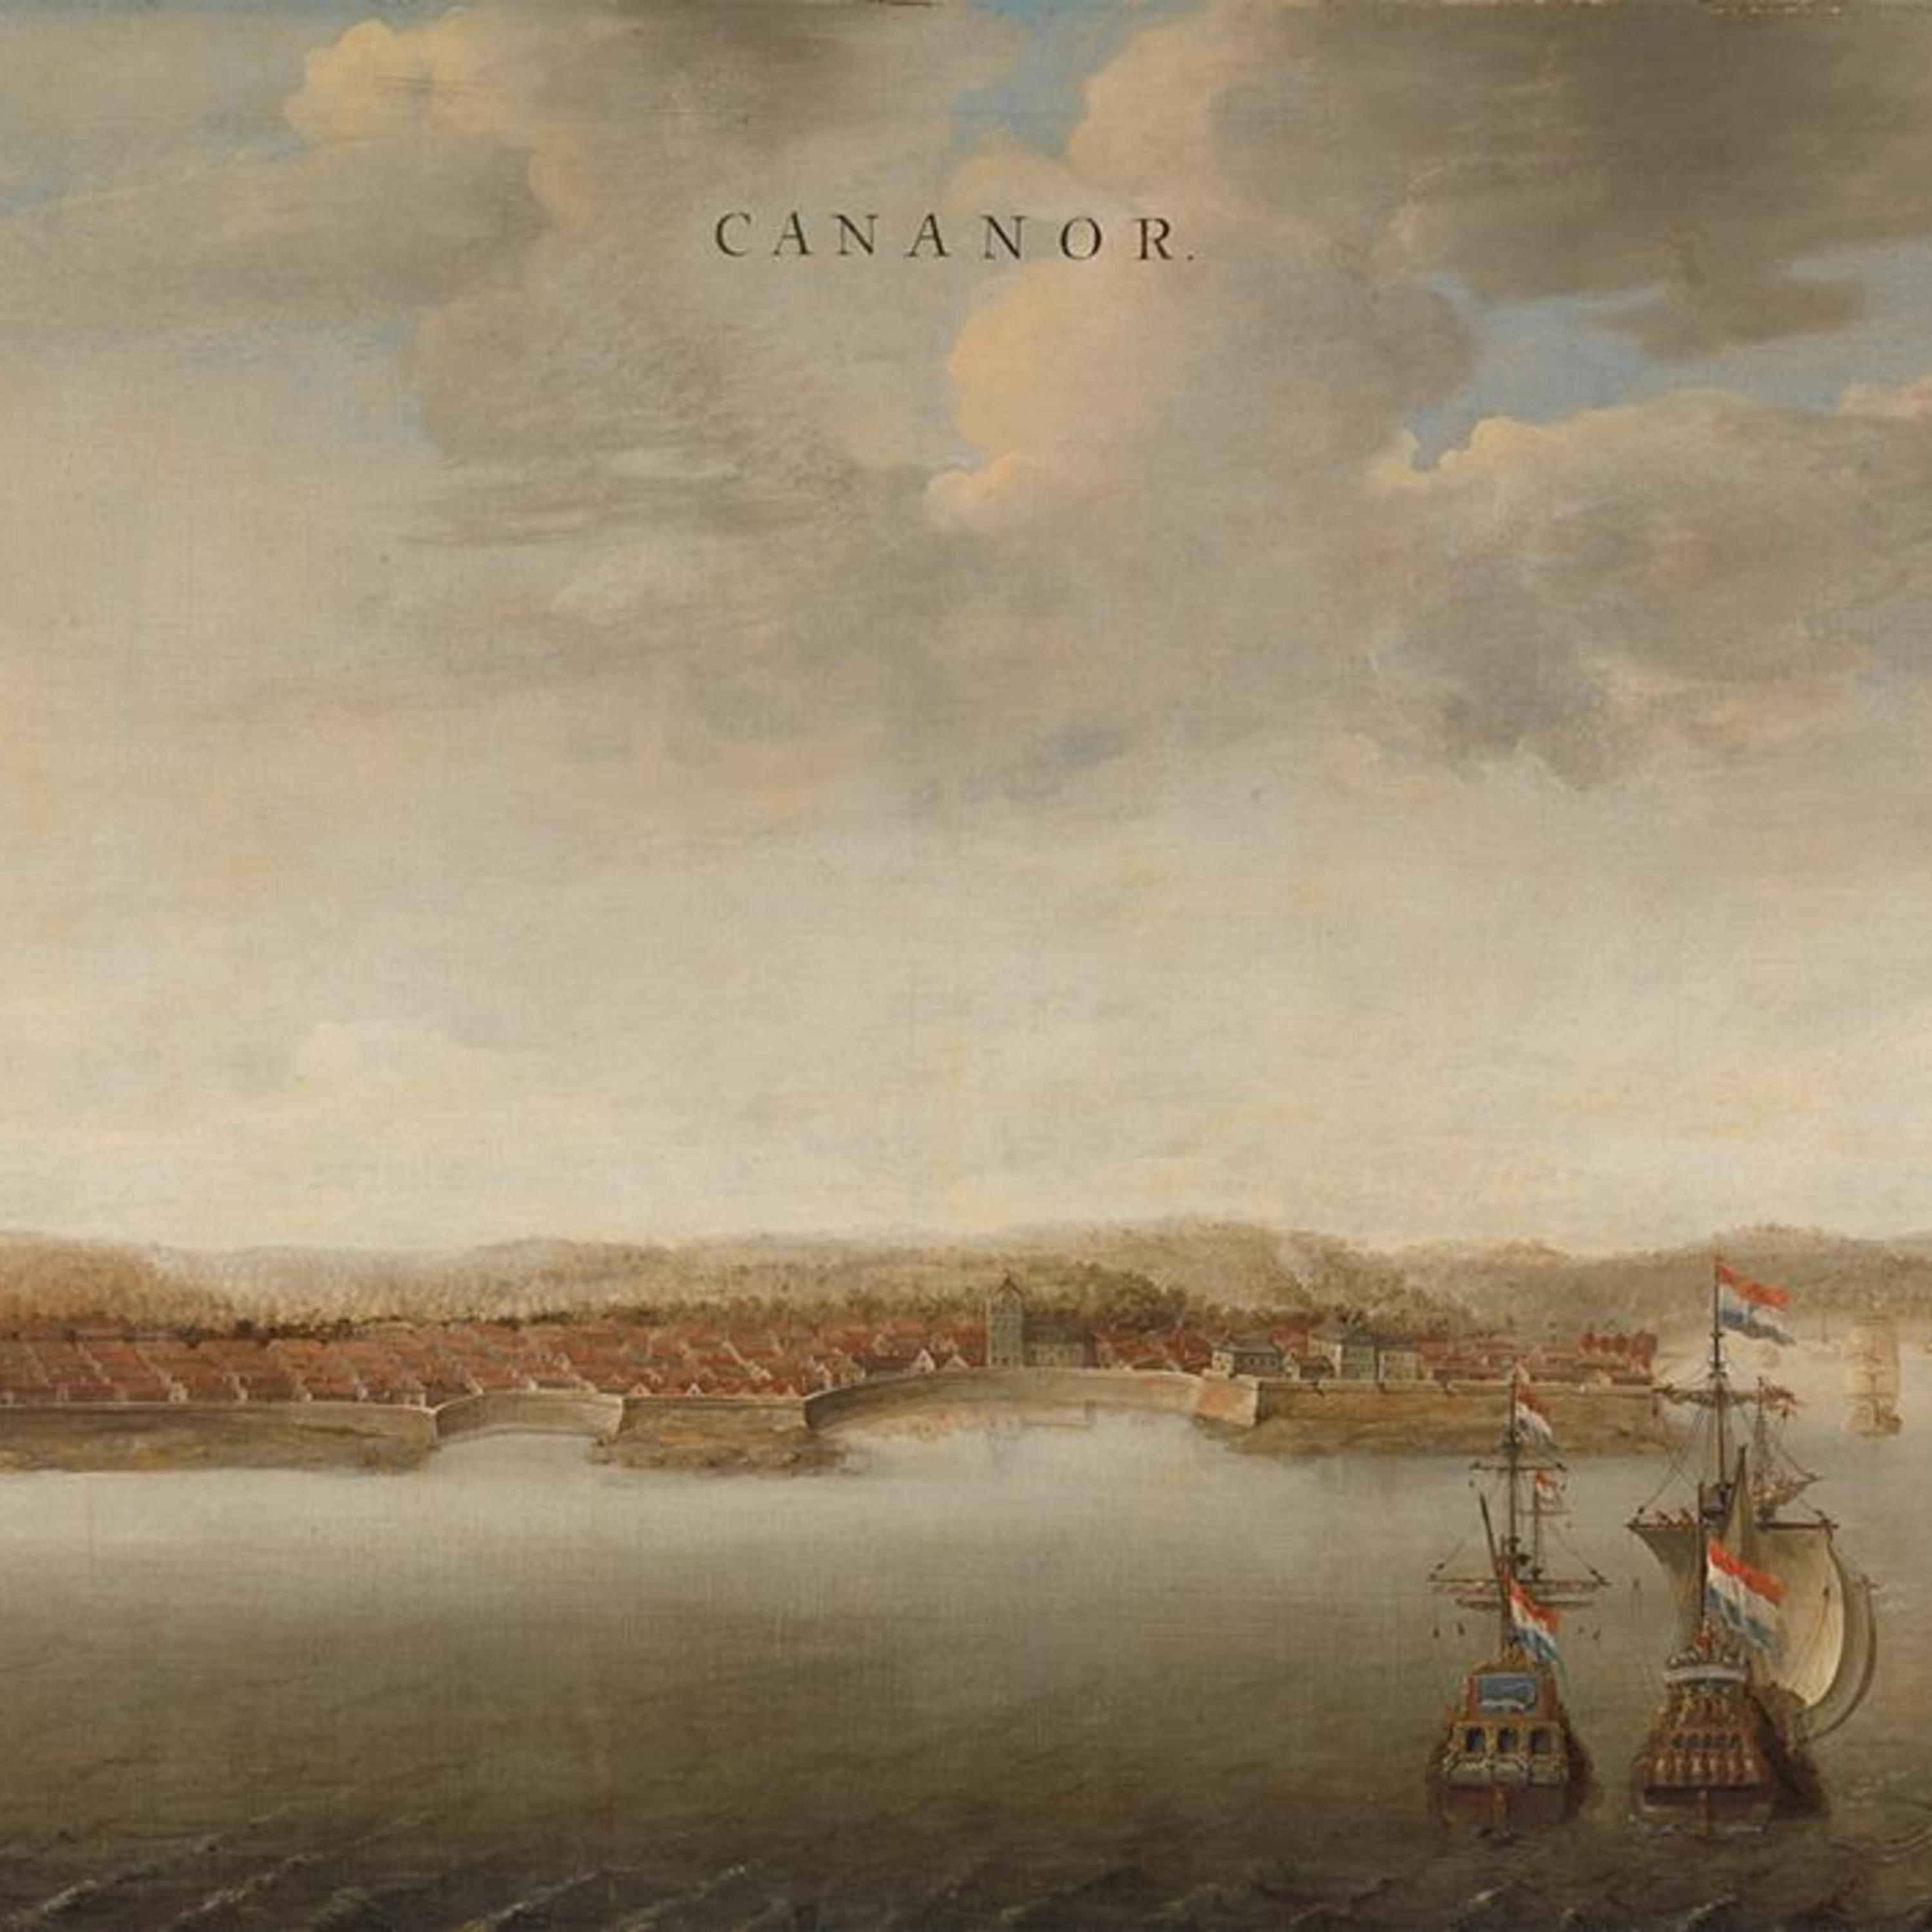 View of Cannanore on the Malabar Coast